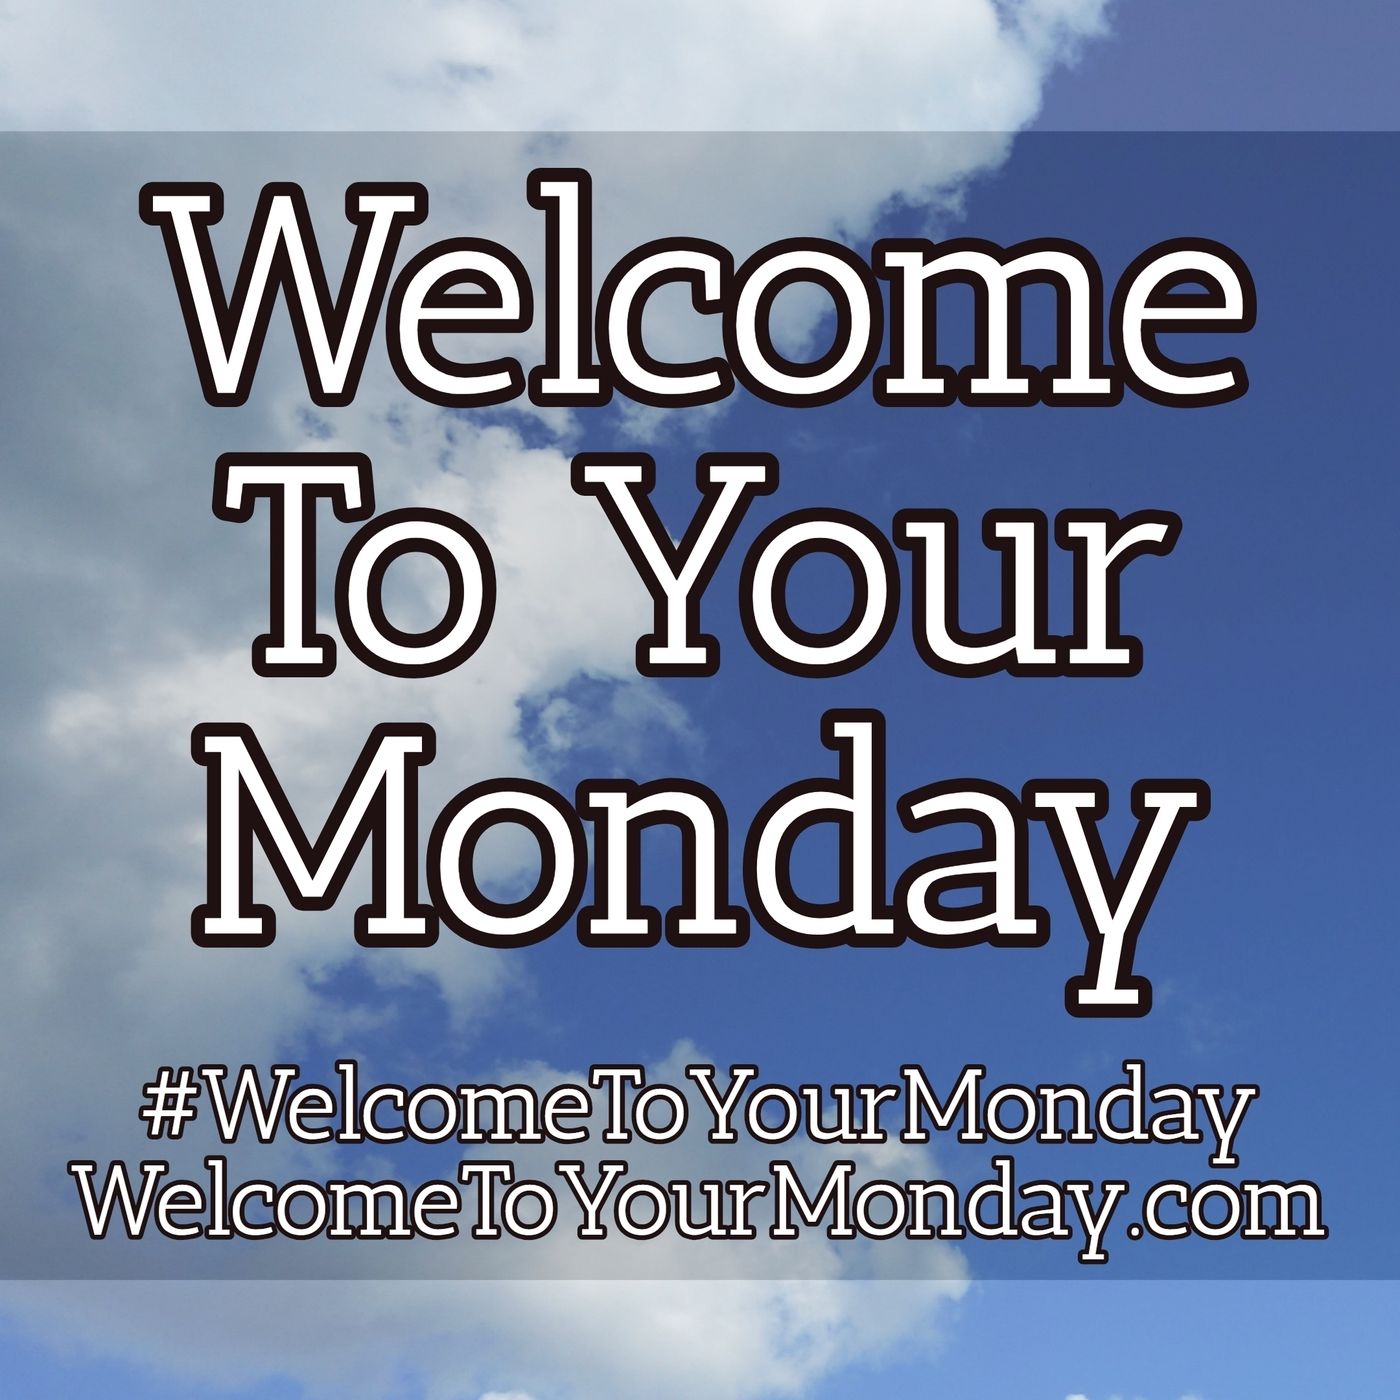 Welcome To Your Monday Message for 10/1/2018